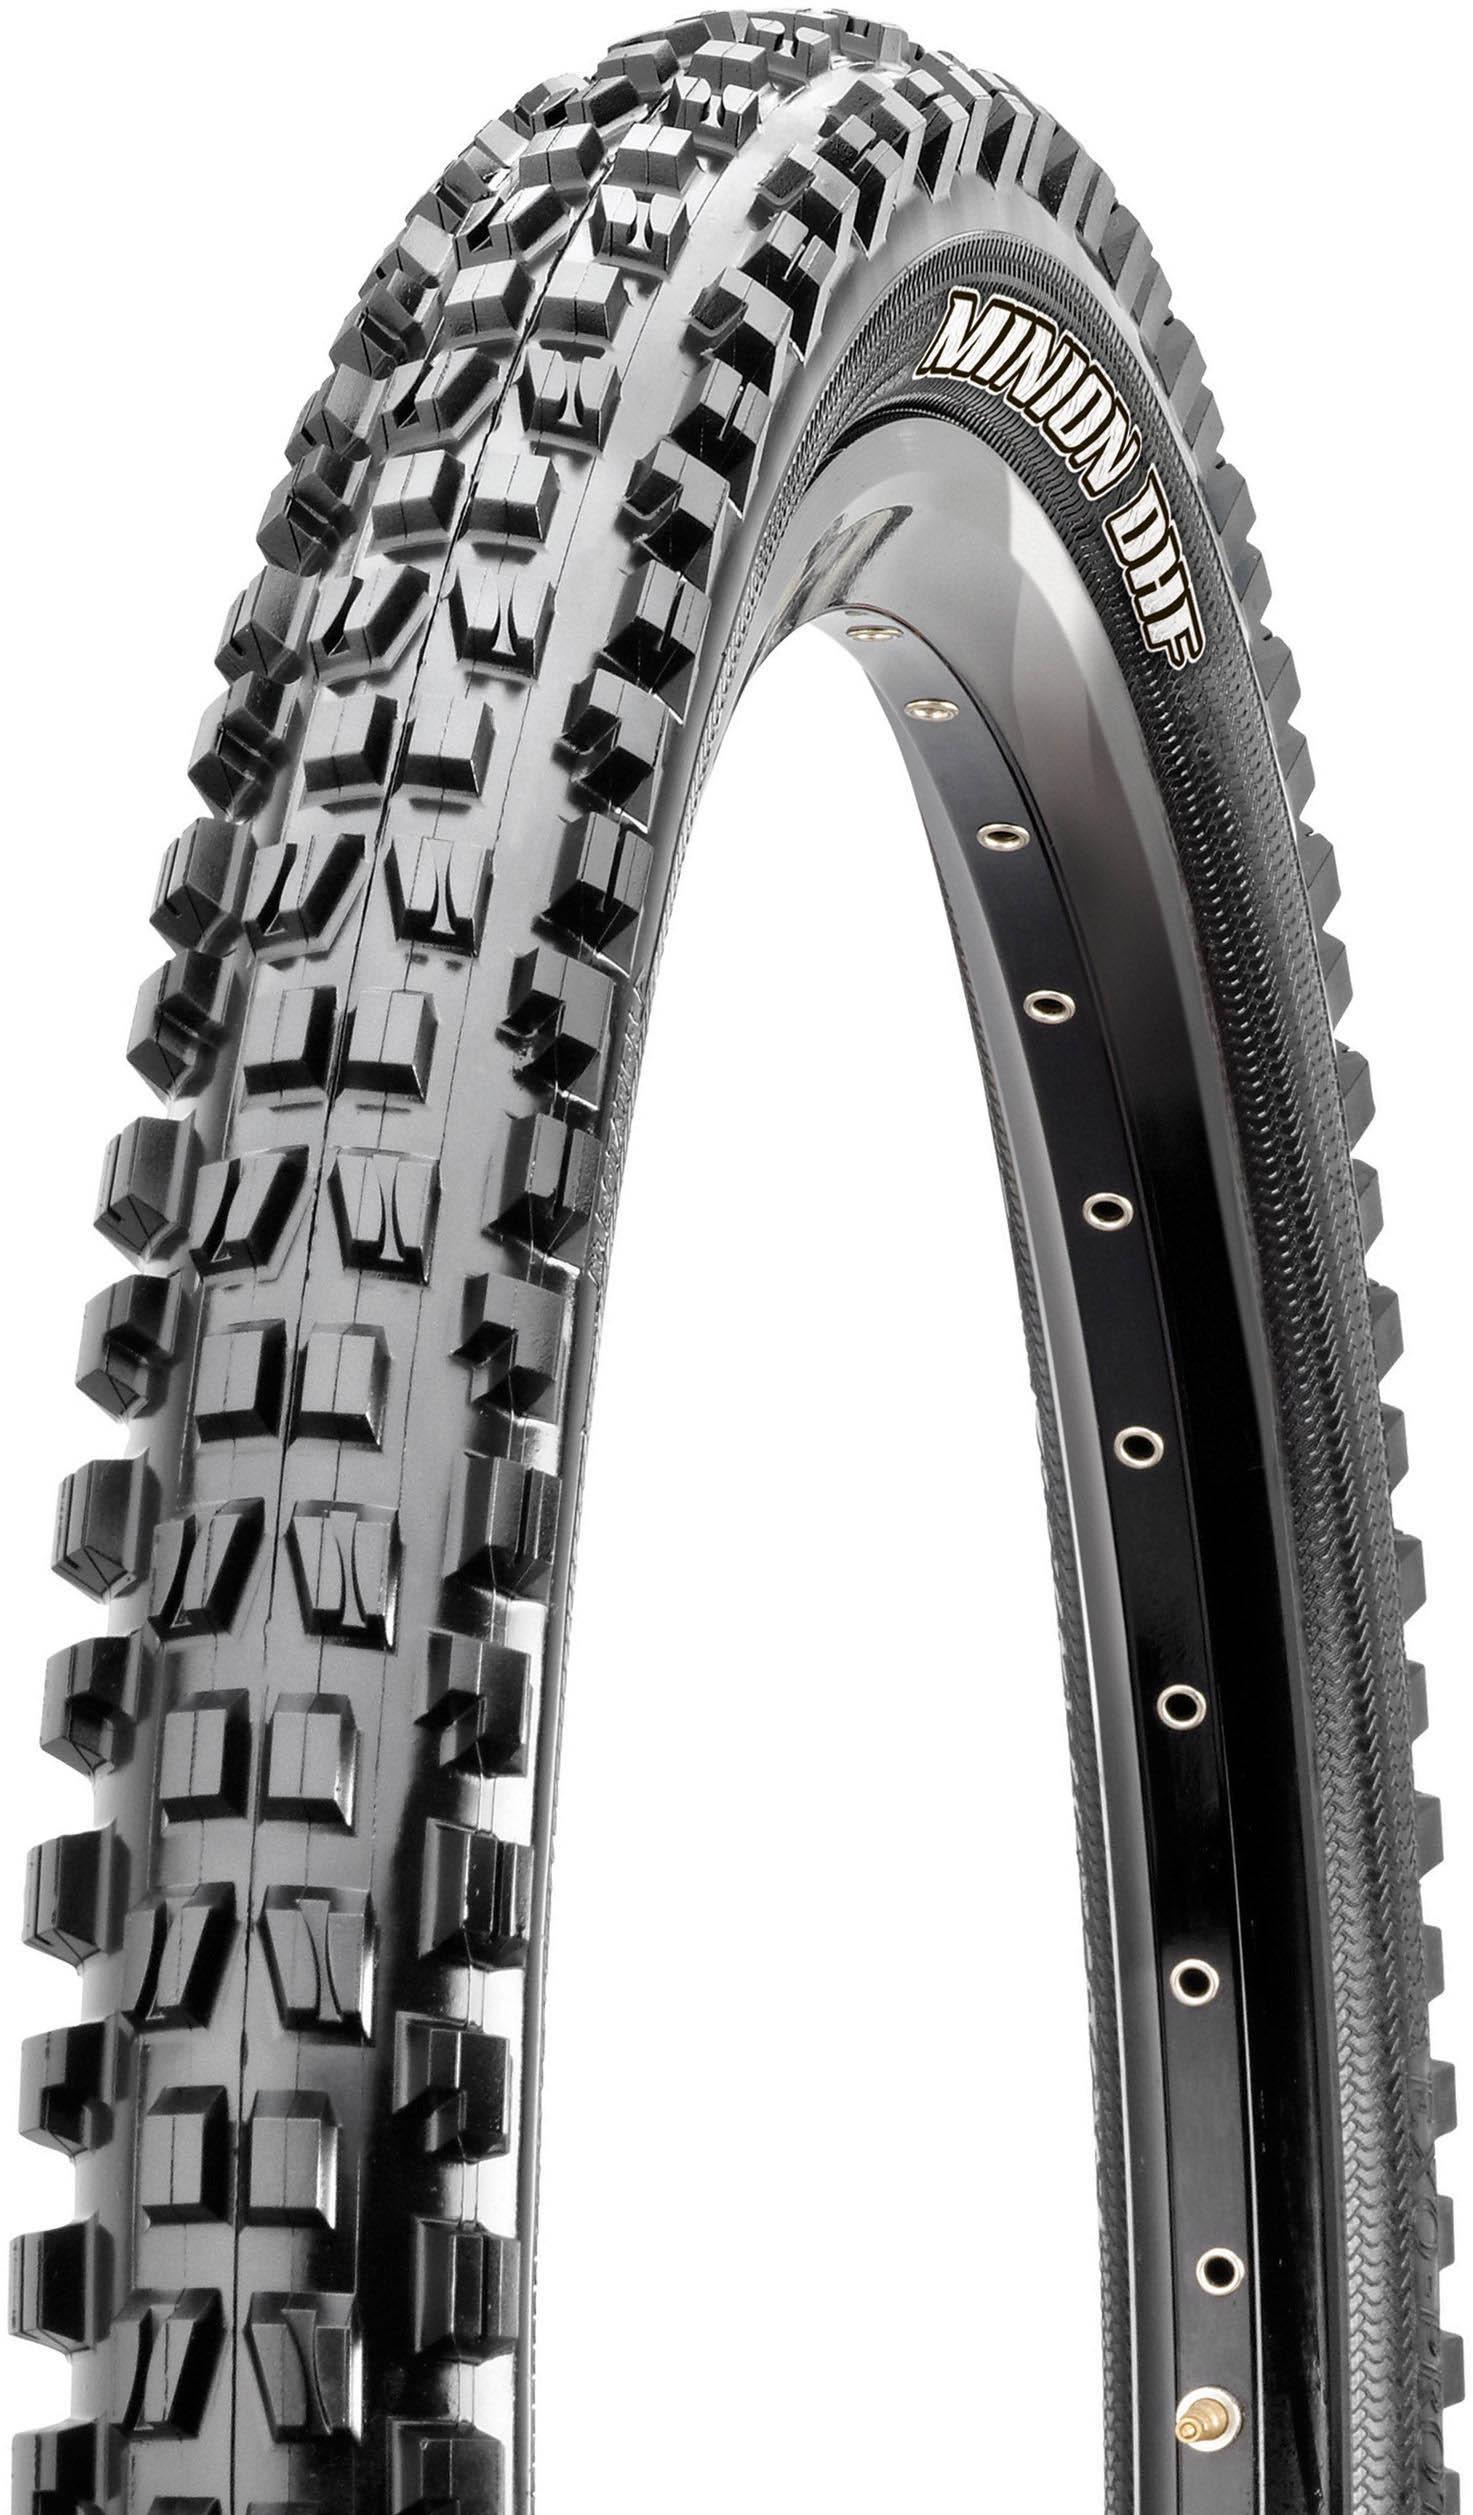 Maxxis Minion DHF 27.5" Wide Trail Tire | tyres